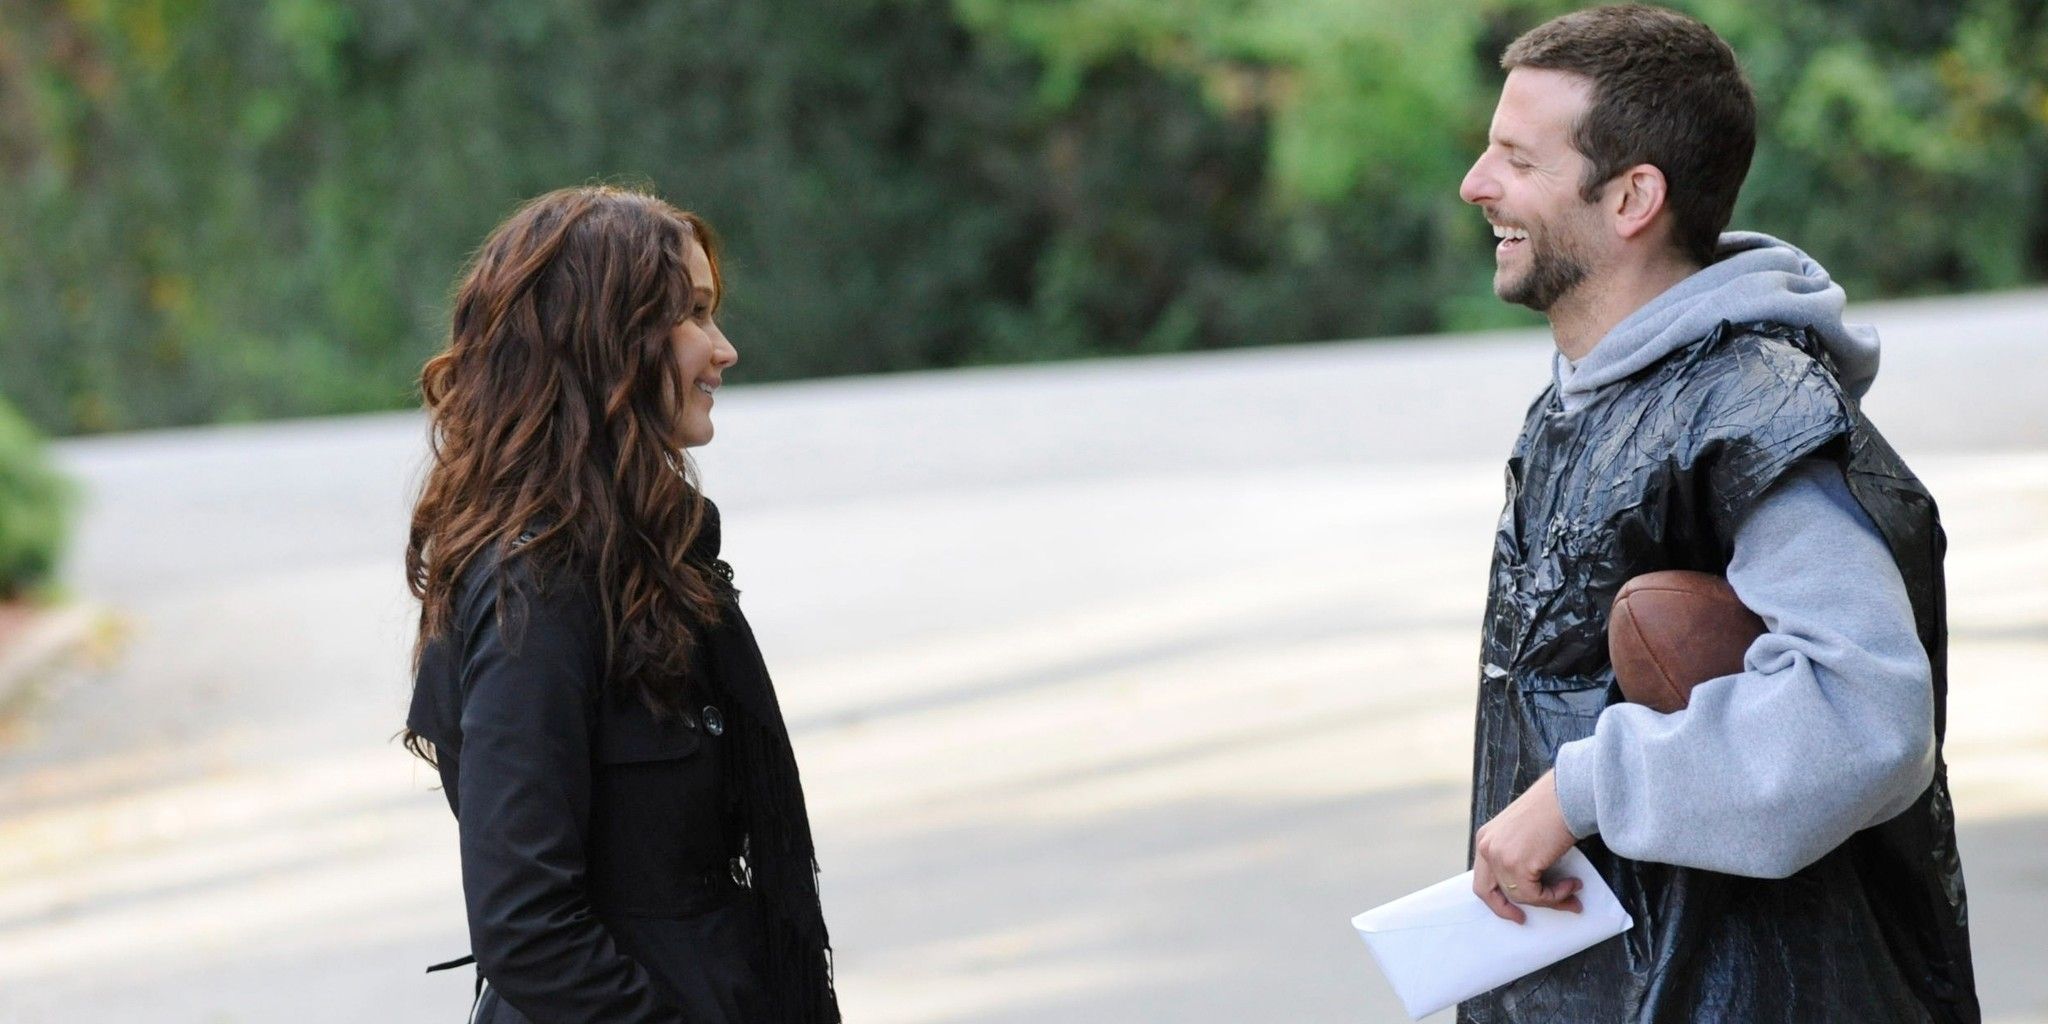 Tifanny and Pat talking on the street in Silver Linings Playbook